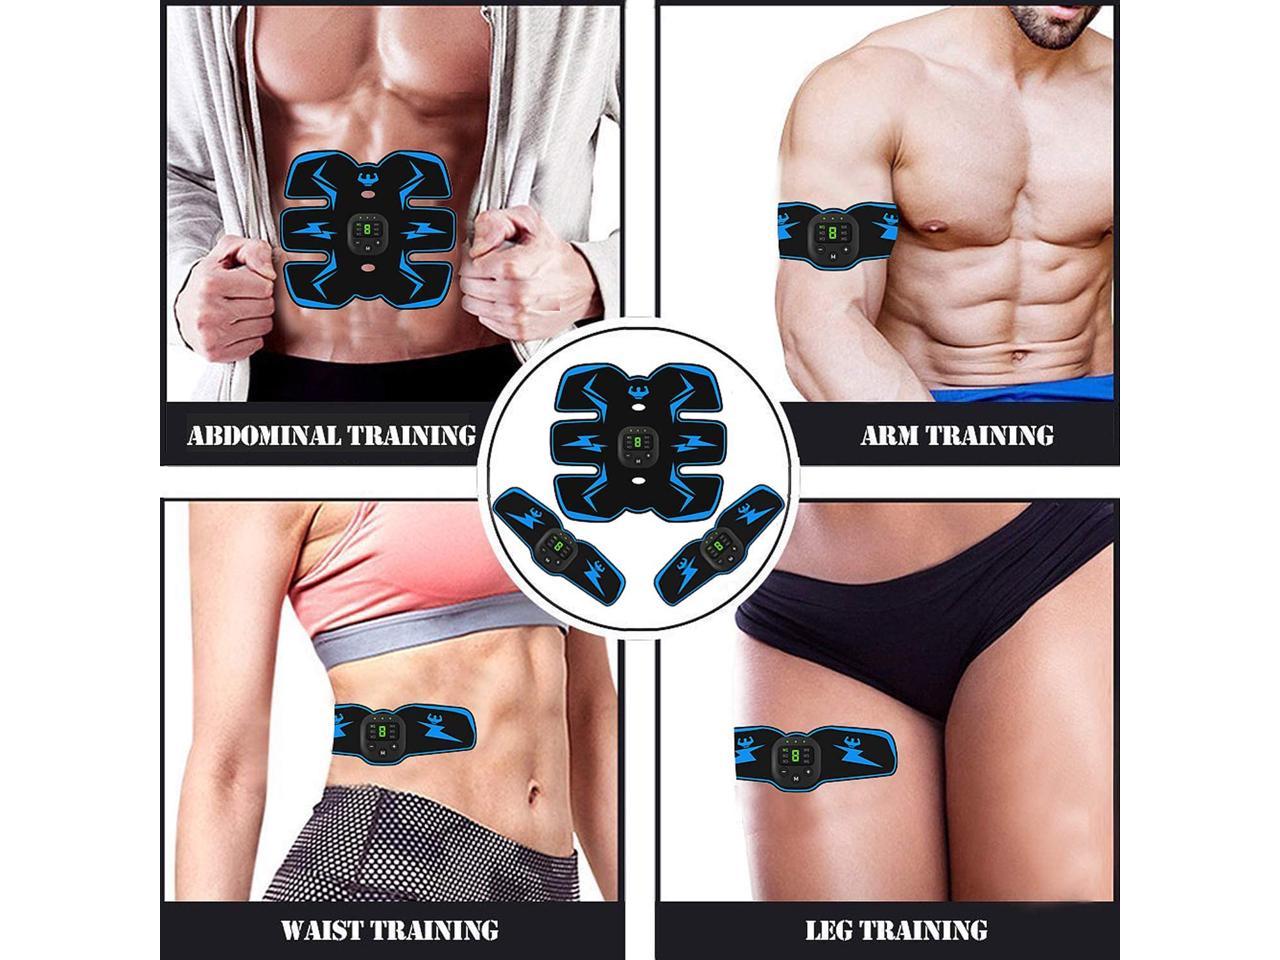 Abs Trainer Abdominal Muscle Toner Electronic Toning Belts Workout Home Fitness Device 10 Replacement Gel Pads for Abdomen Arm Leg Men And Women EMS Muscle Stimulator